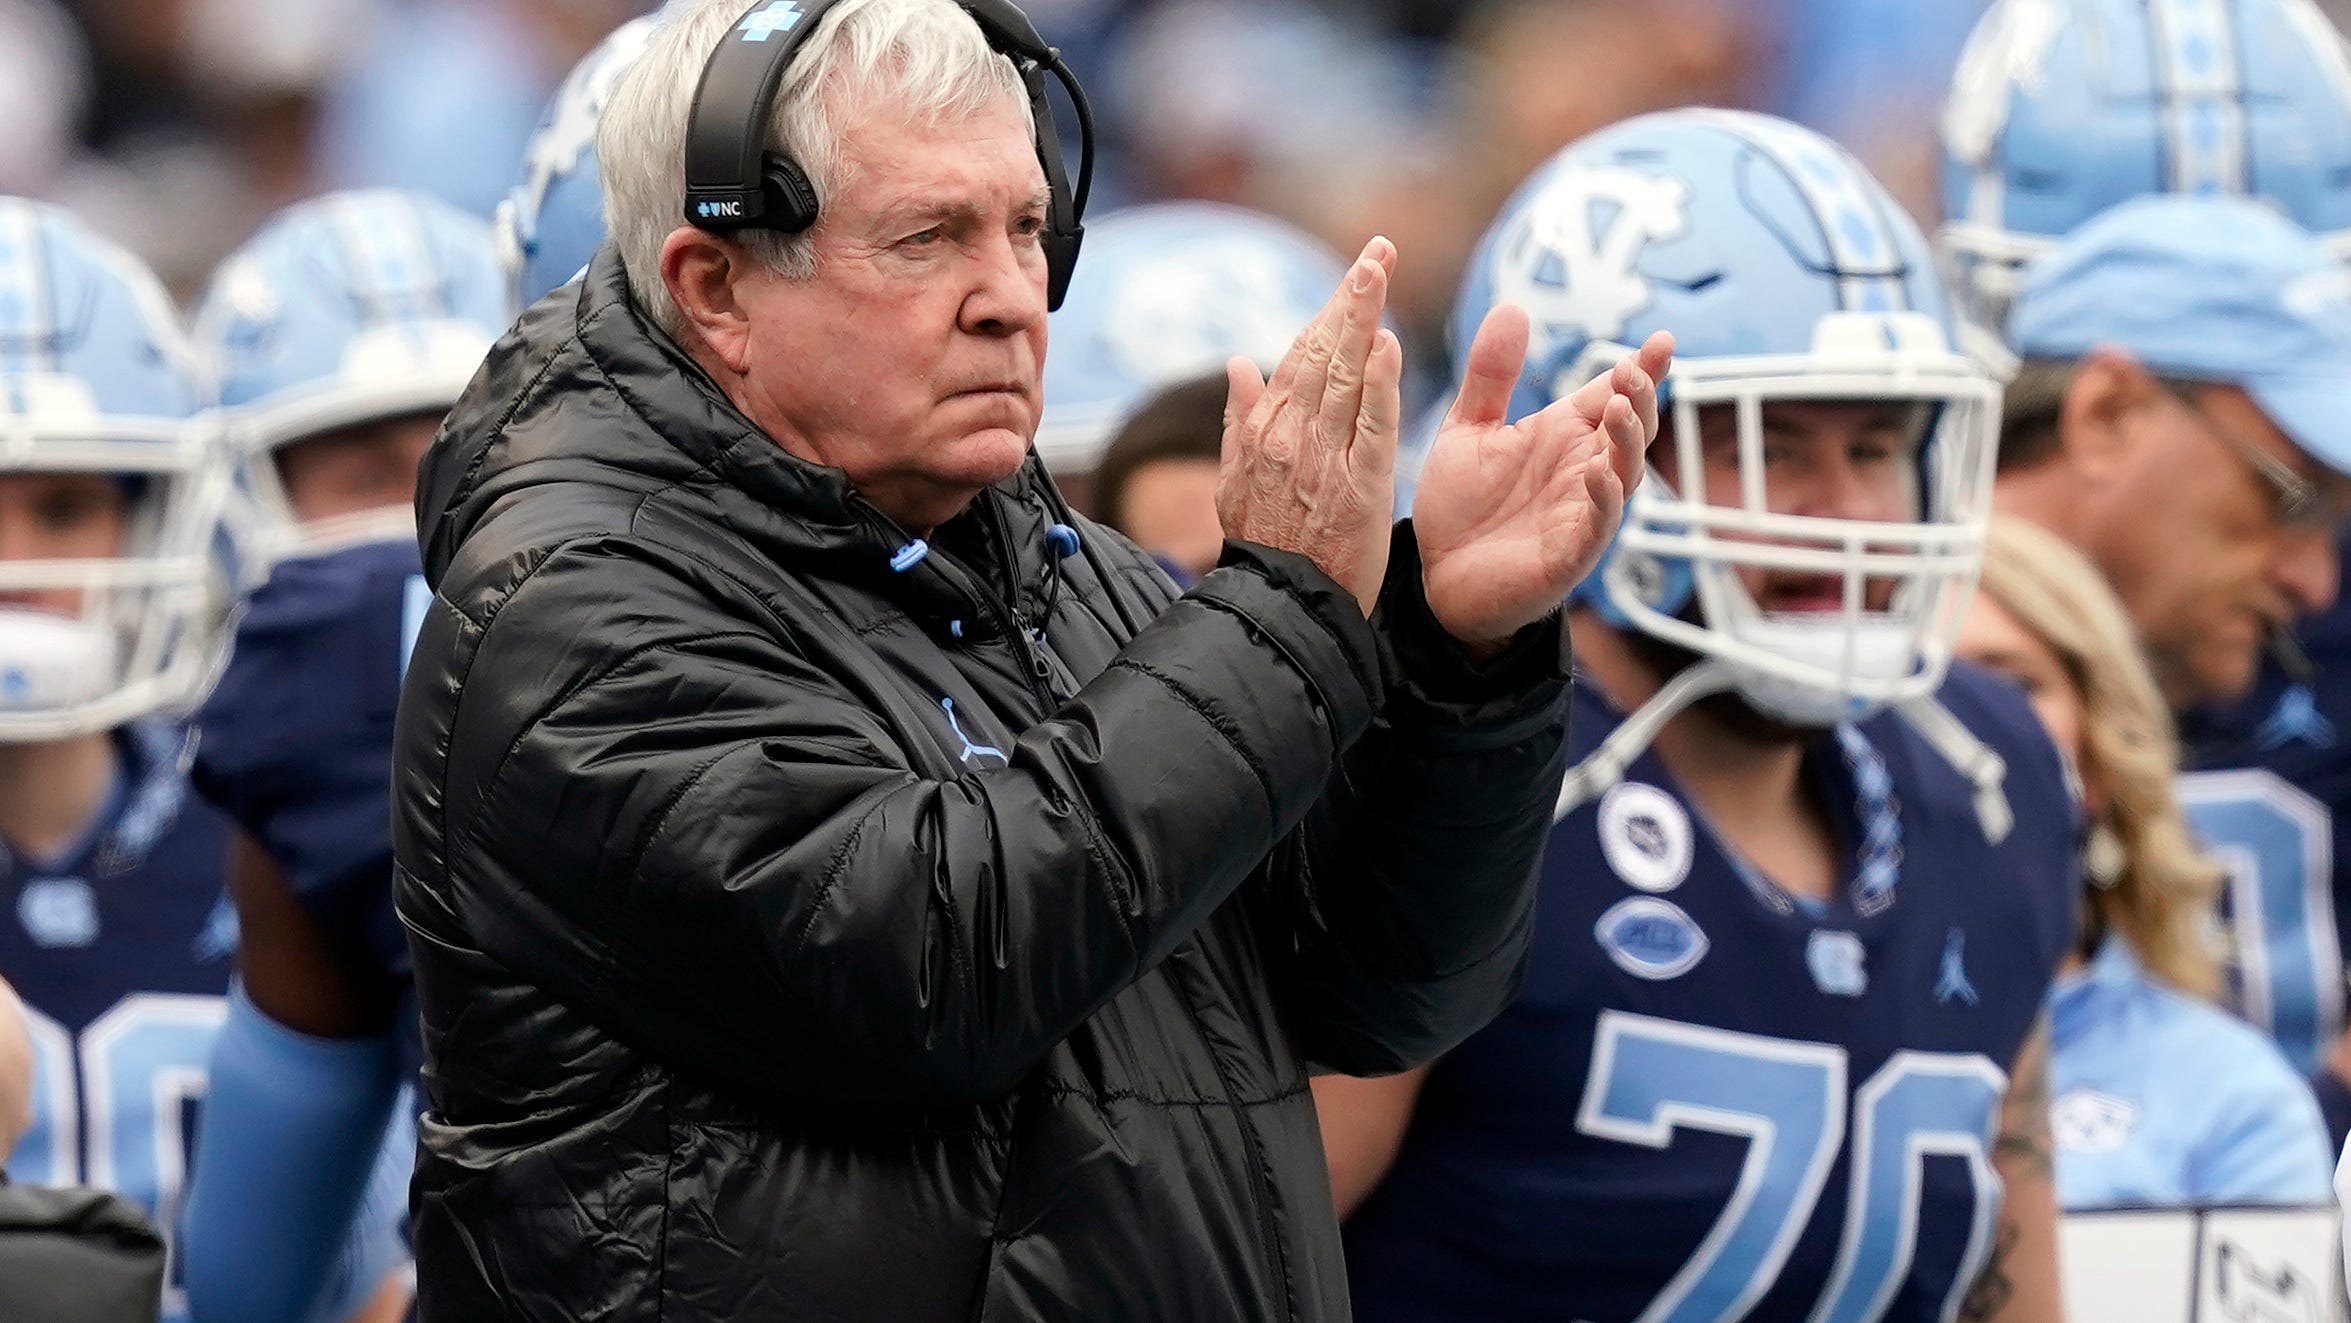 ‘Put the cherry on top’: What to watch as UNC can play spoiler role against rival NC State